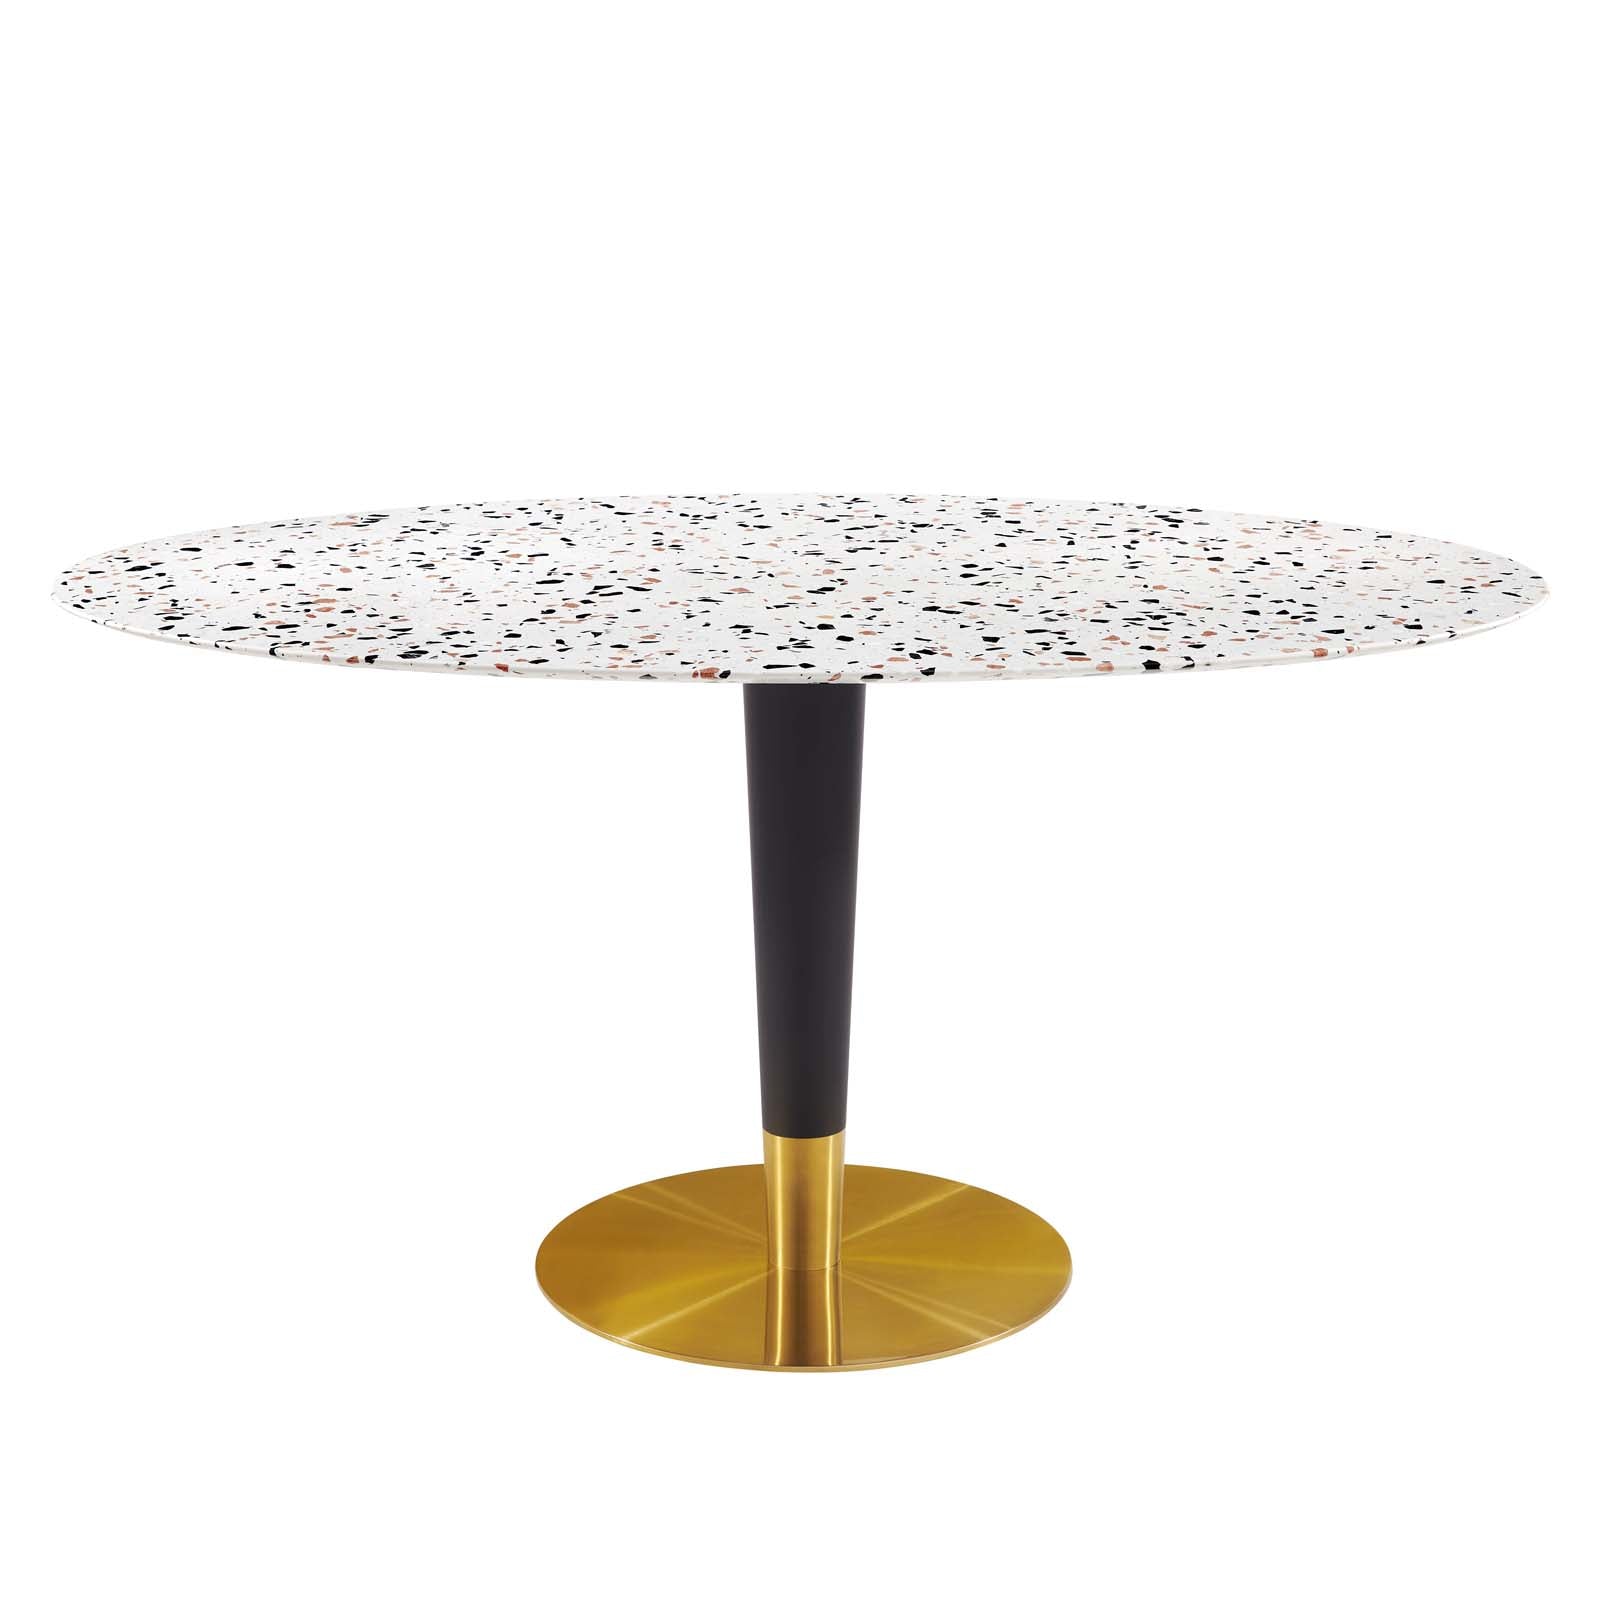 Zinque 60" Oval Terrazzo Dining Table-Dining Table-Modway-Wall2Wall Furnishings